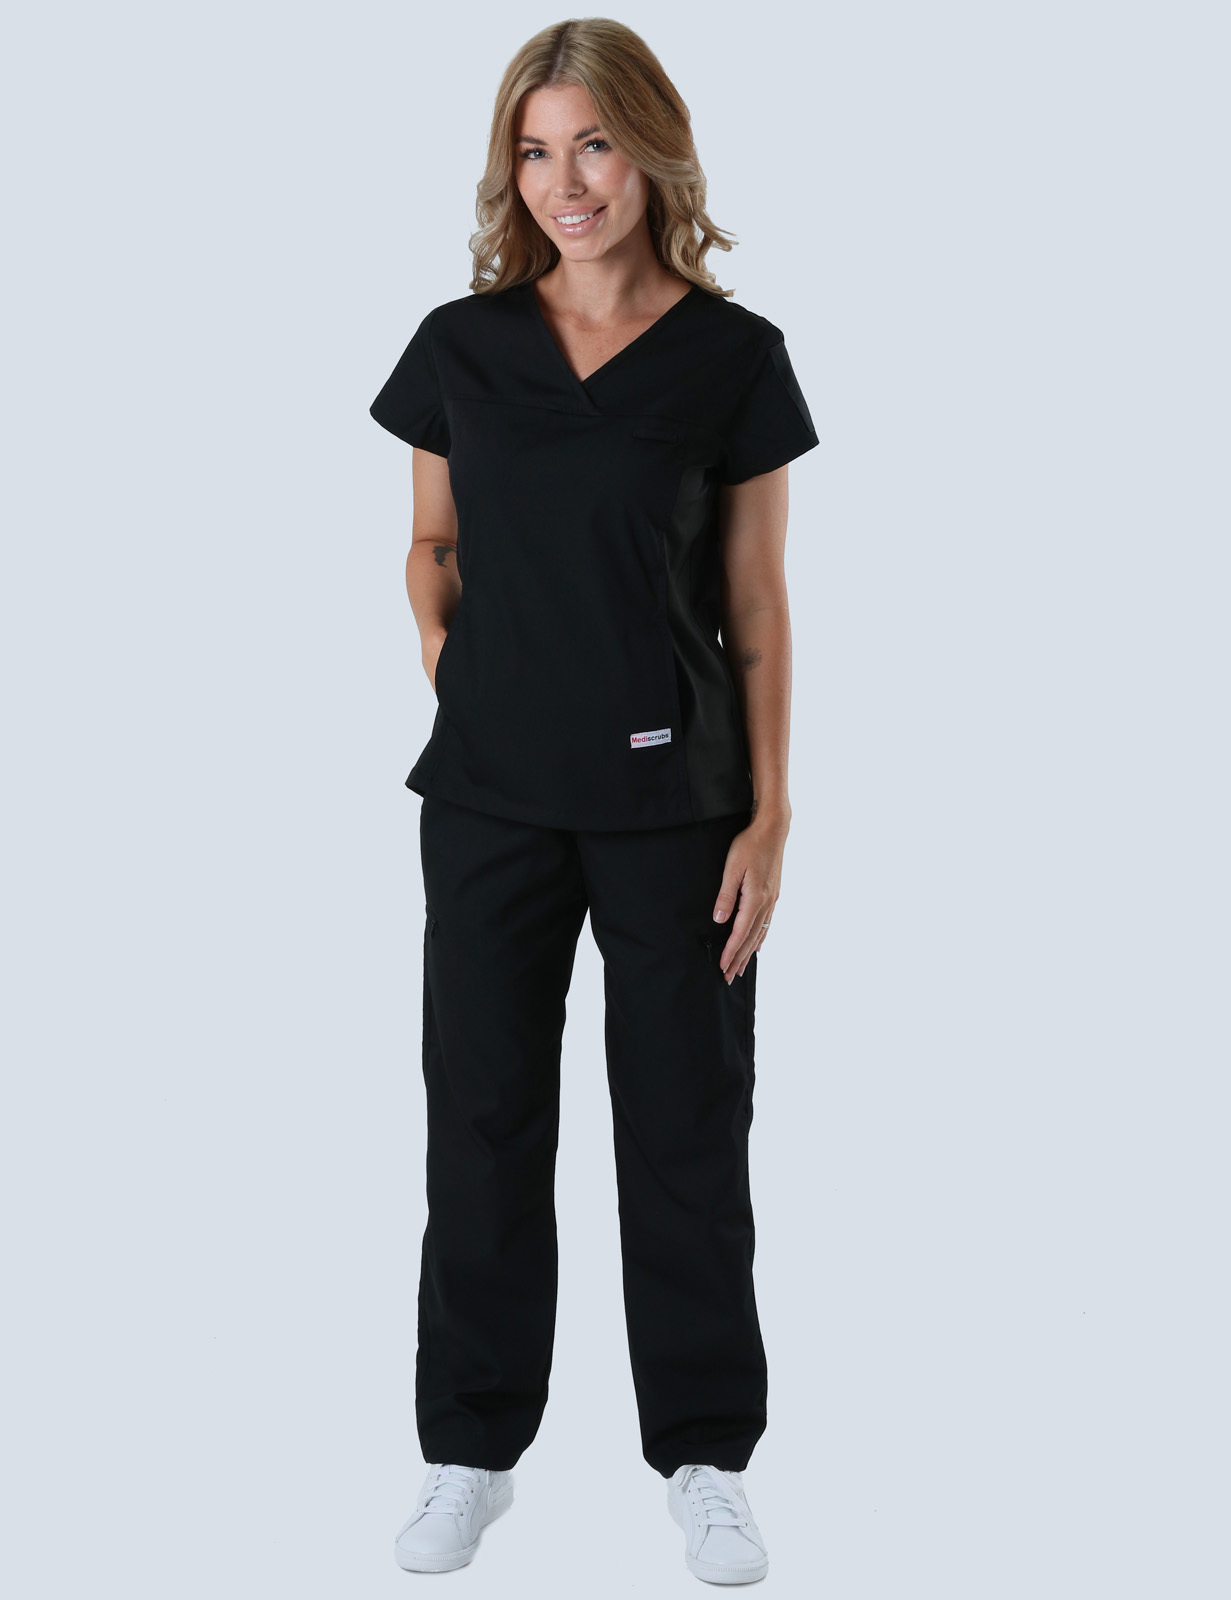 Women's Fit Solid Scrub Top With Spandex Panel - Black - XX Small